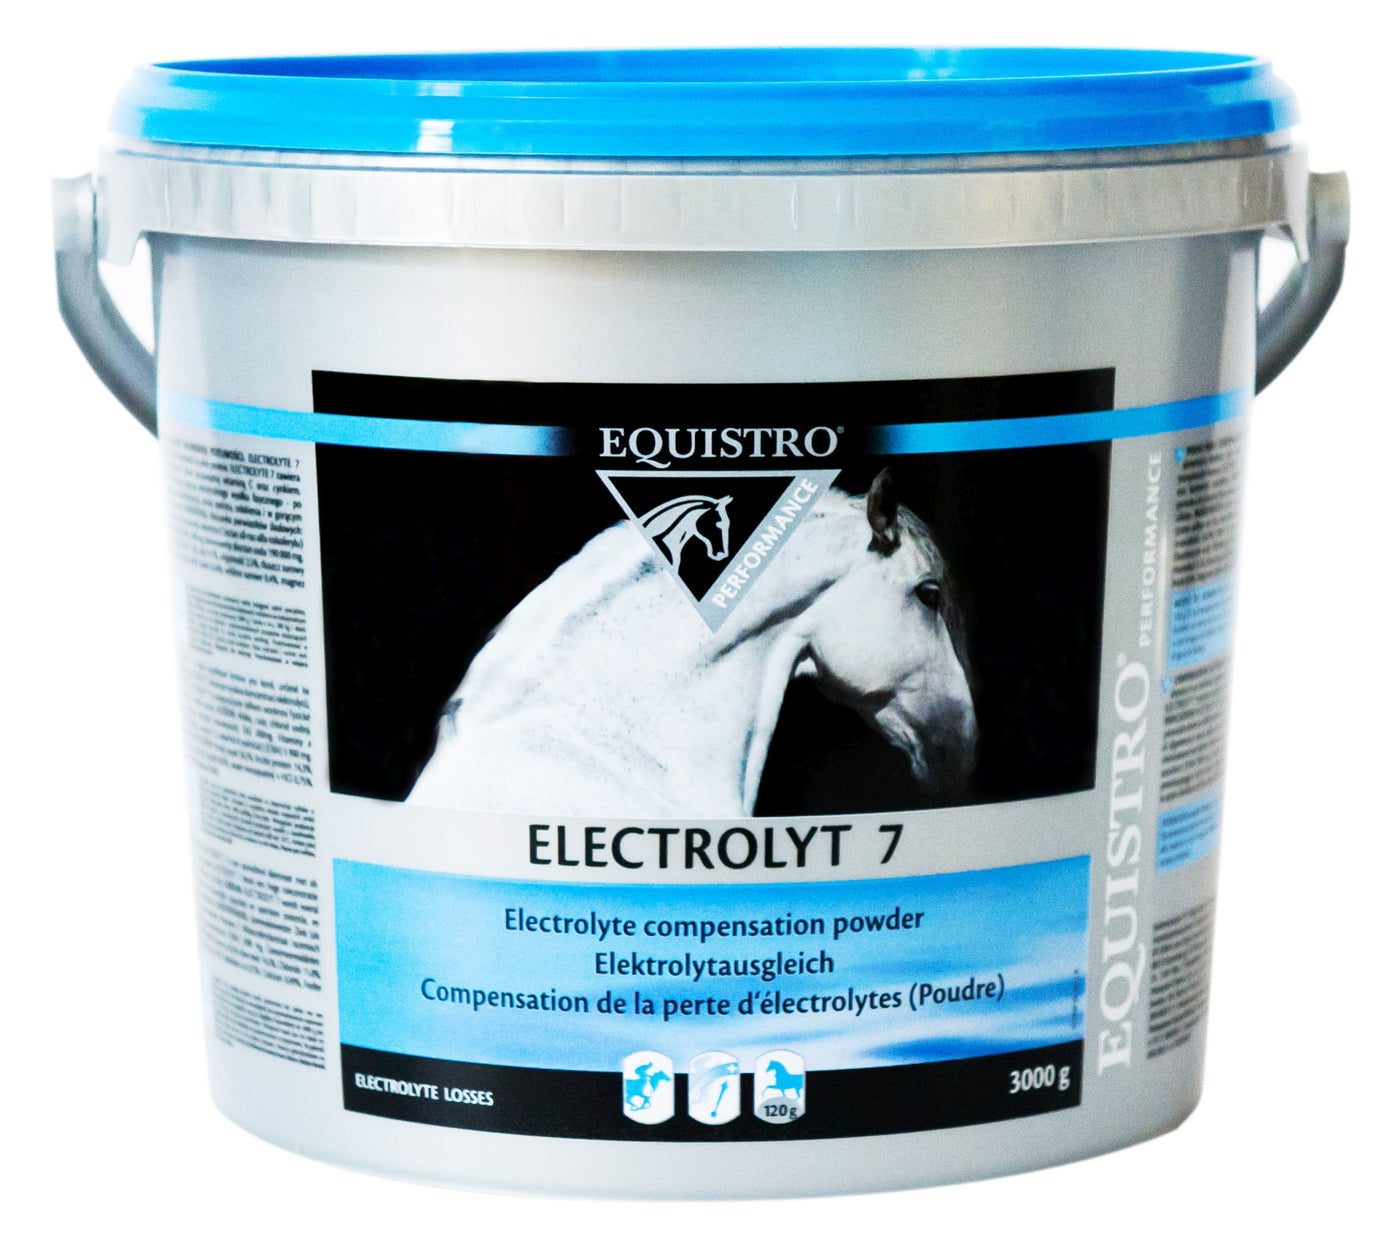 Equistro Electrolyte 7